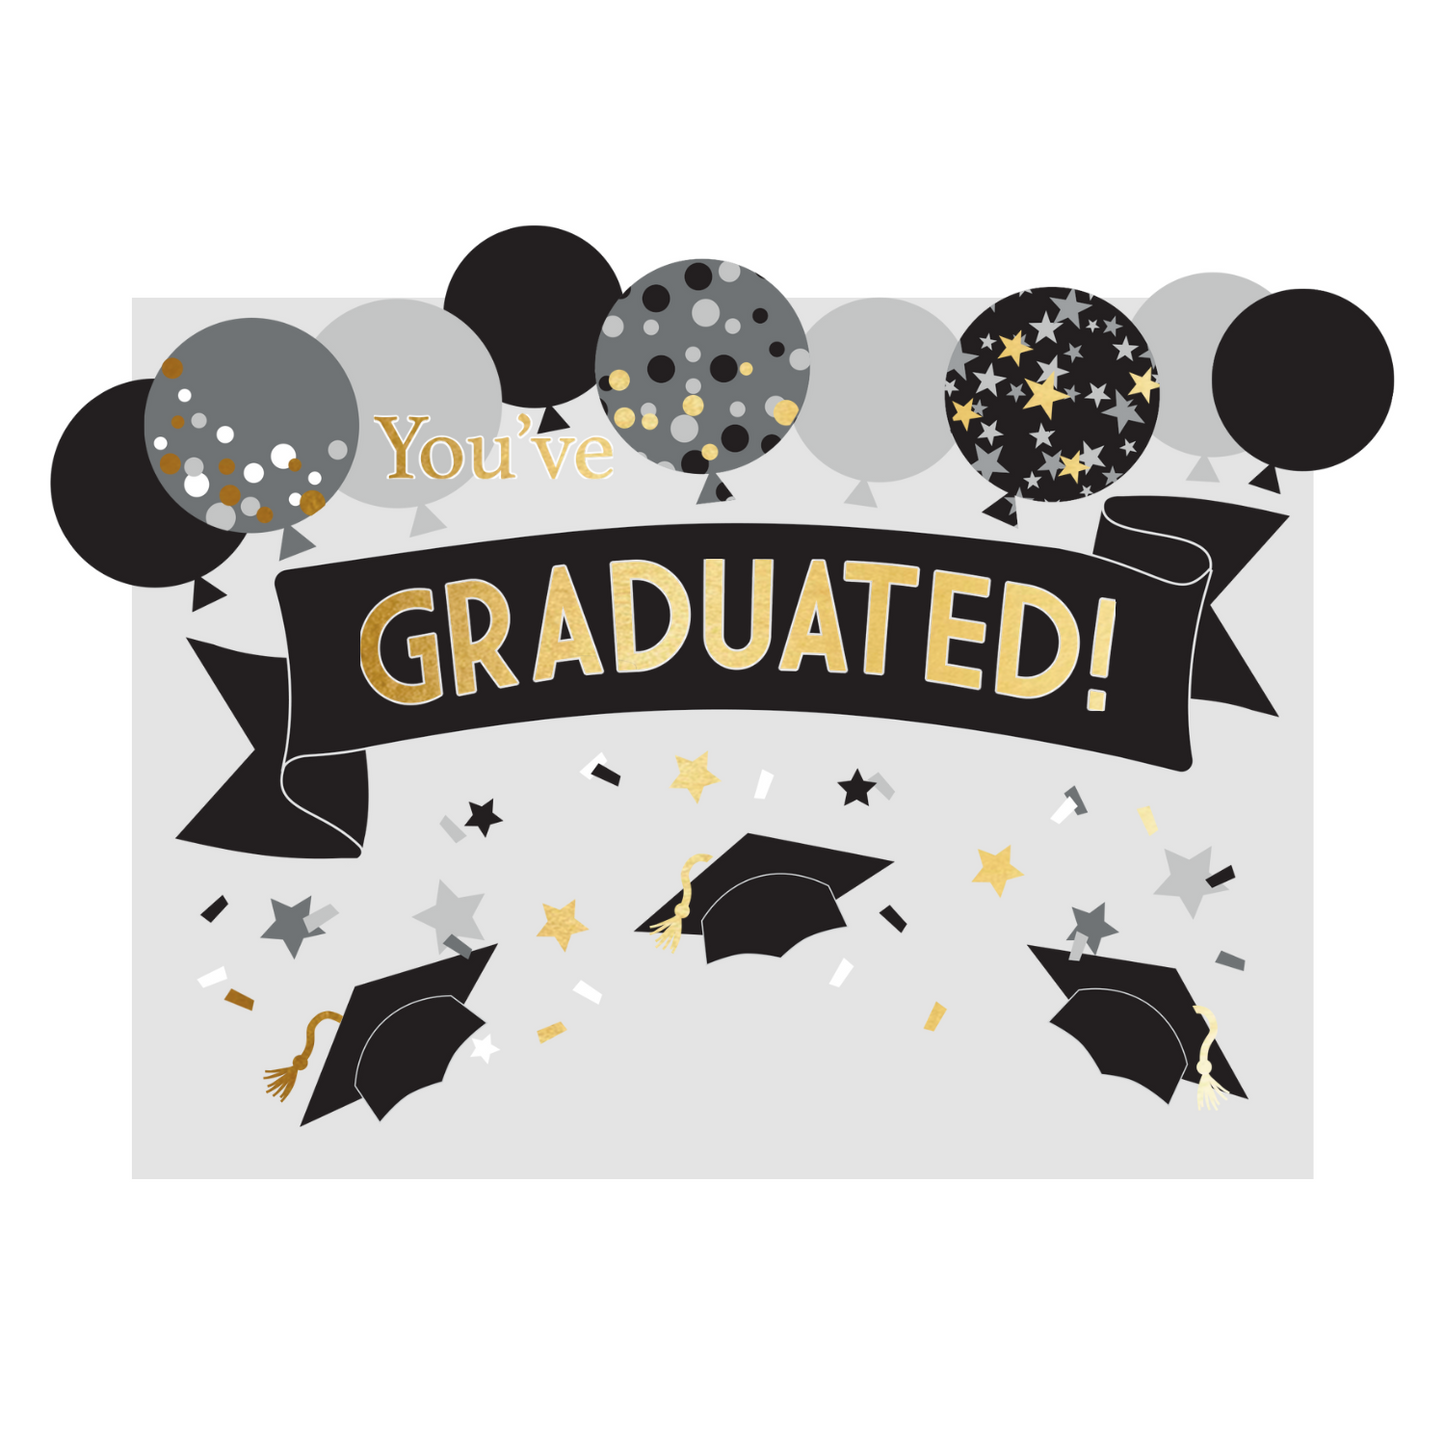 You've Graduated! Pop Out Paper Celebrations Card